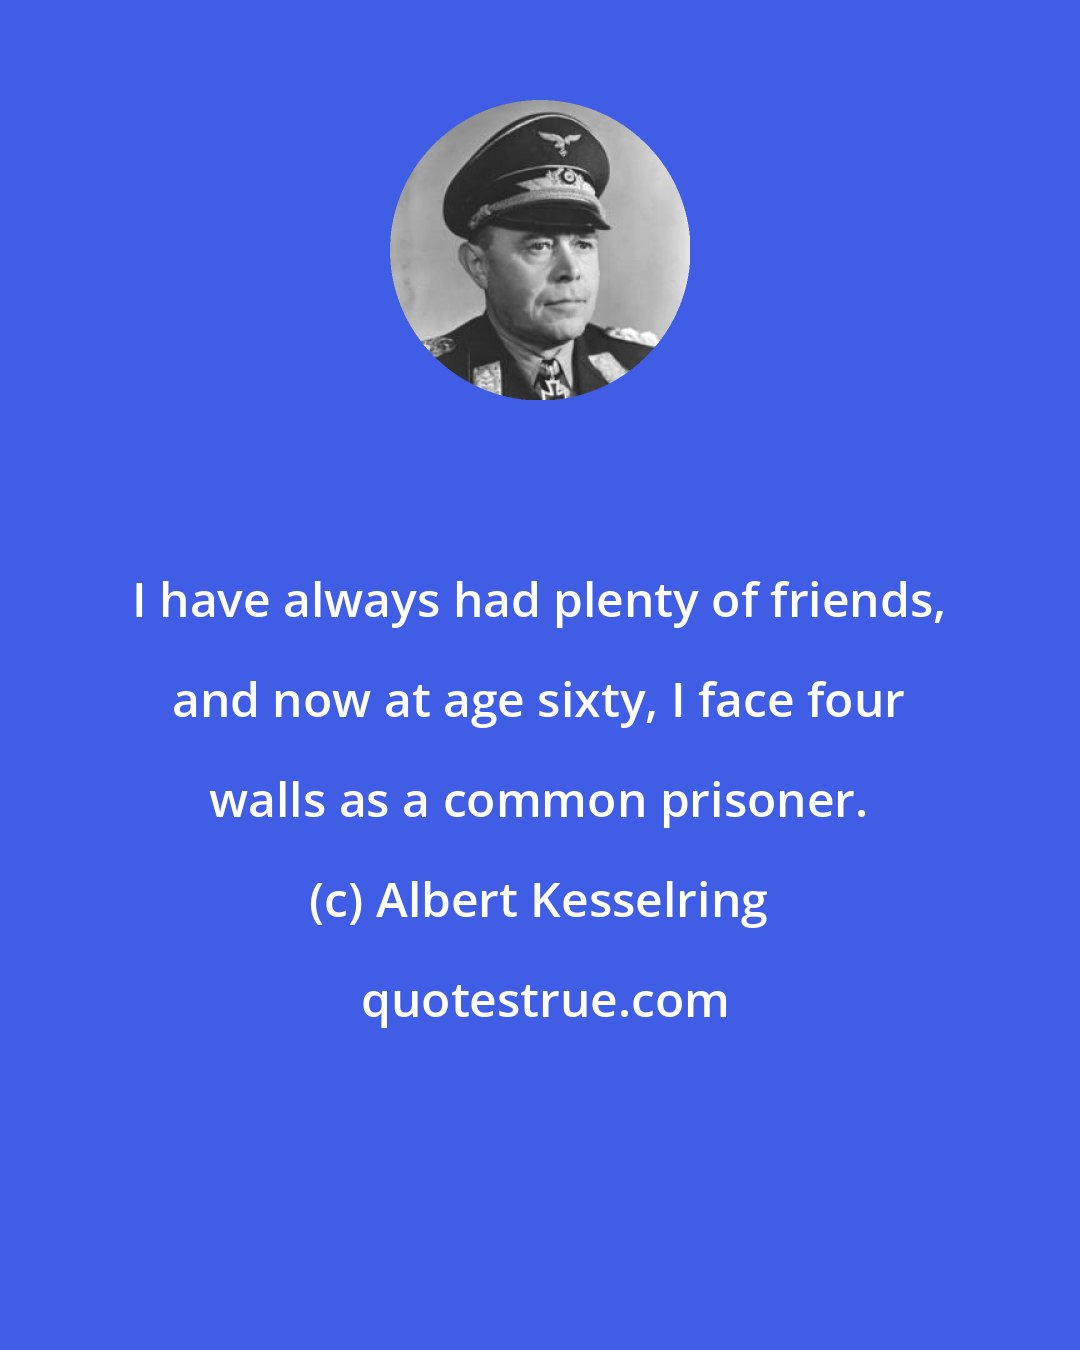 Albert Kesselring: I have always had plenty of friends, and now at age sixty, I face four walls as a common prisoner.